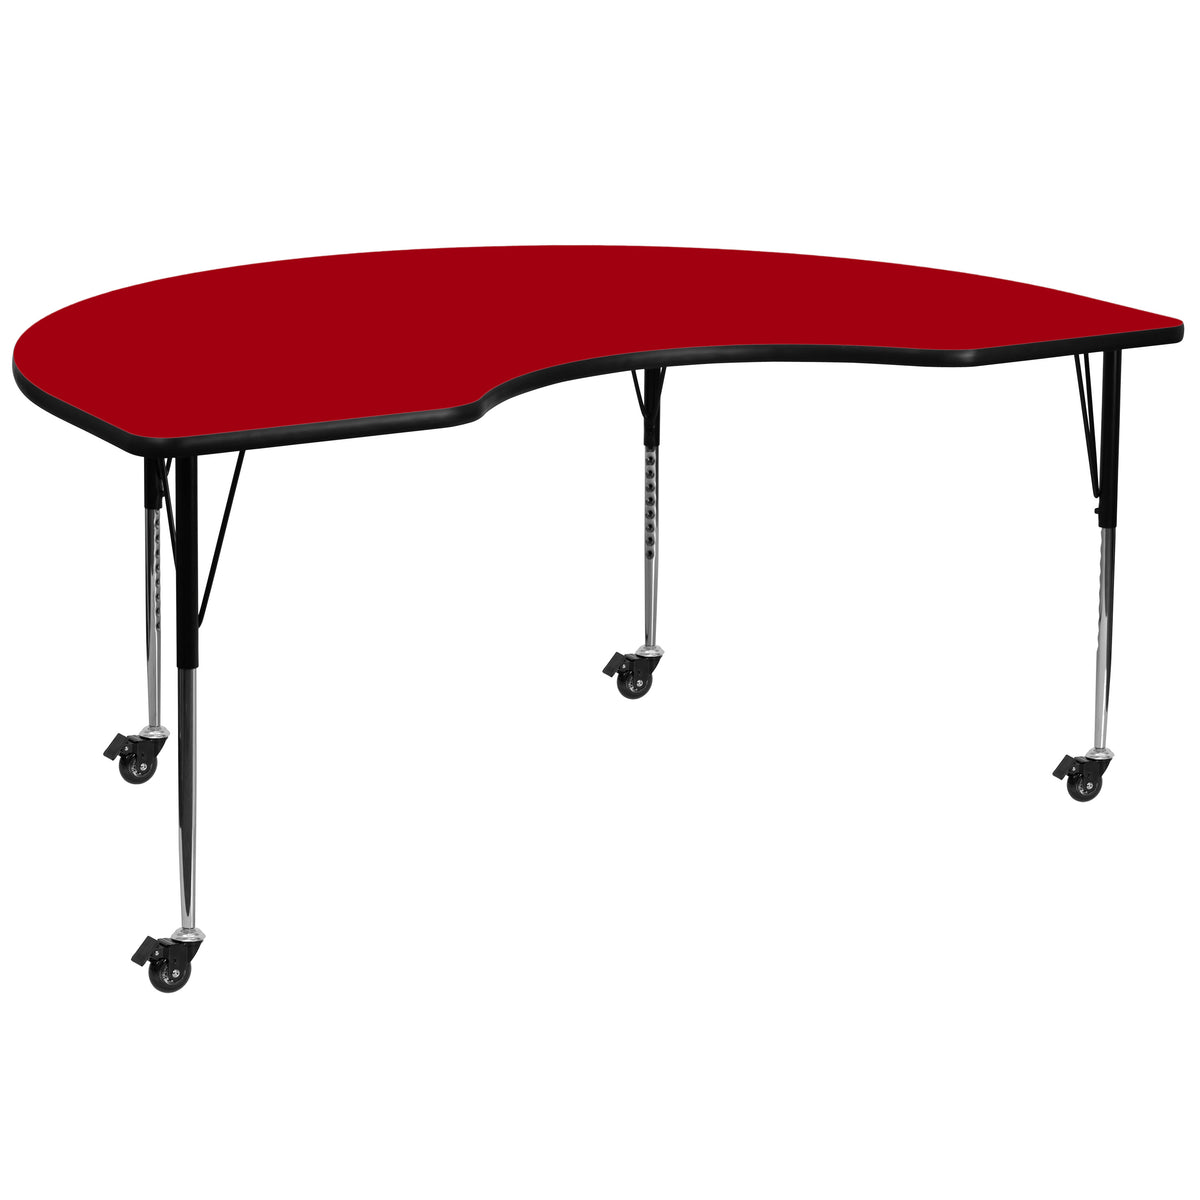 Red |#| Mobile 48inchW x 72inchL Kidney Red Thermal Laminate Adjustable Activity Table